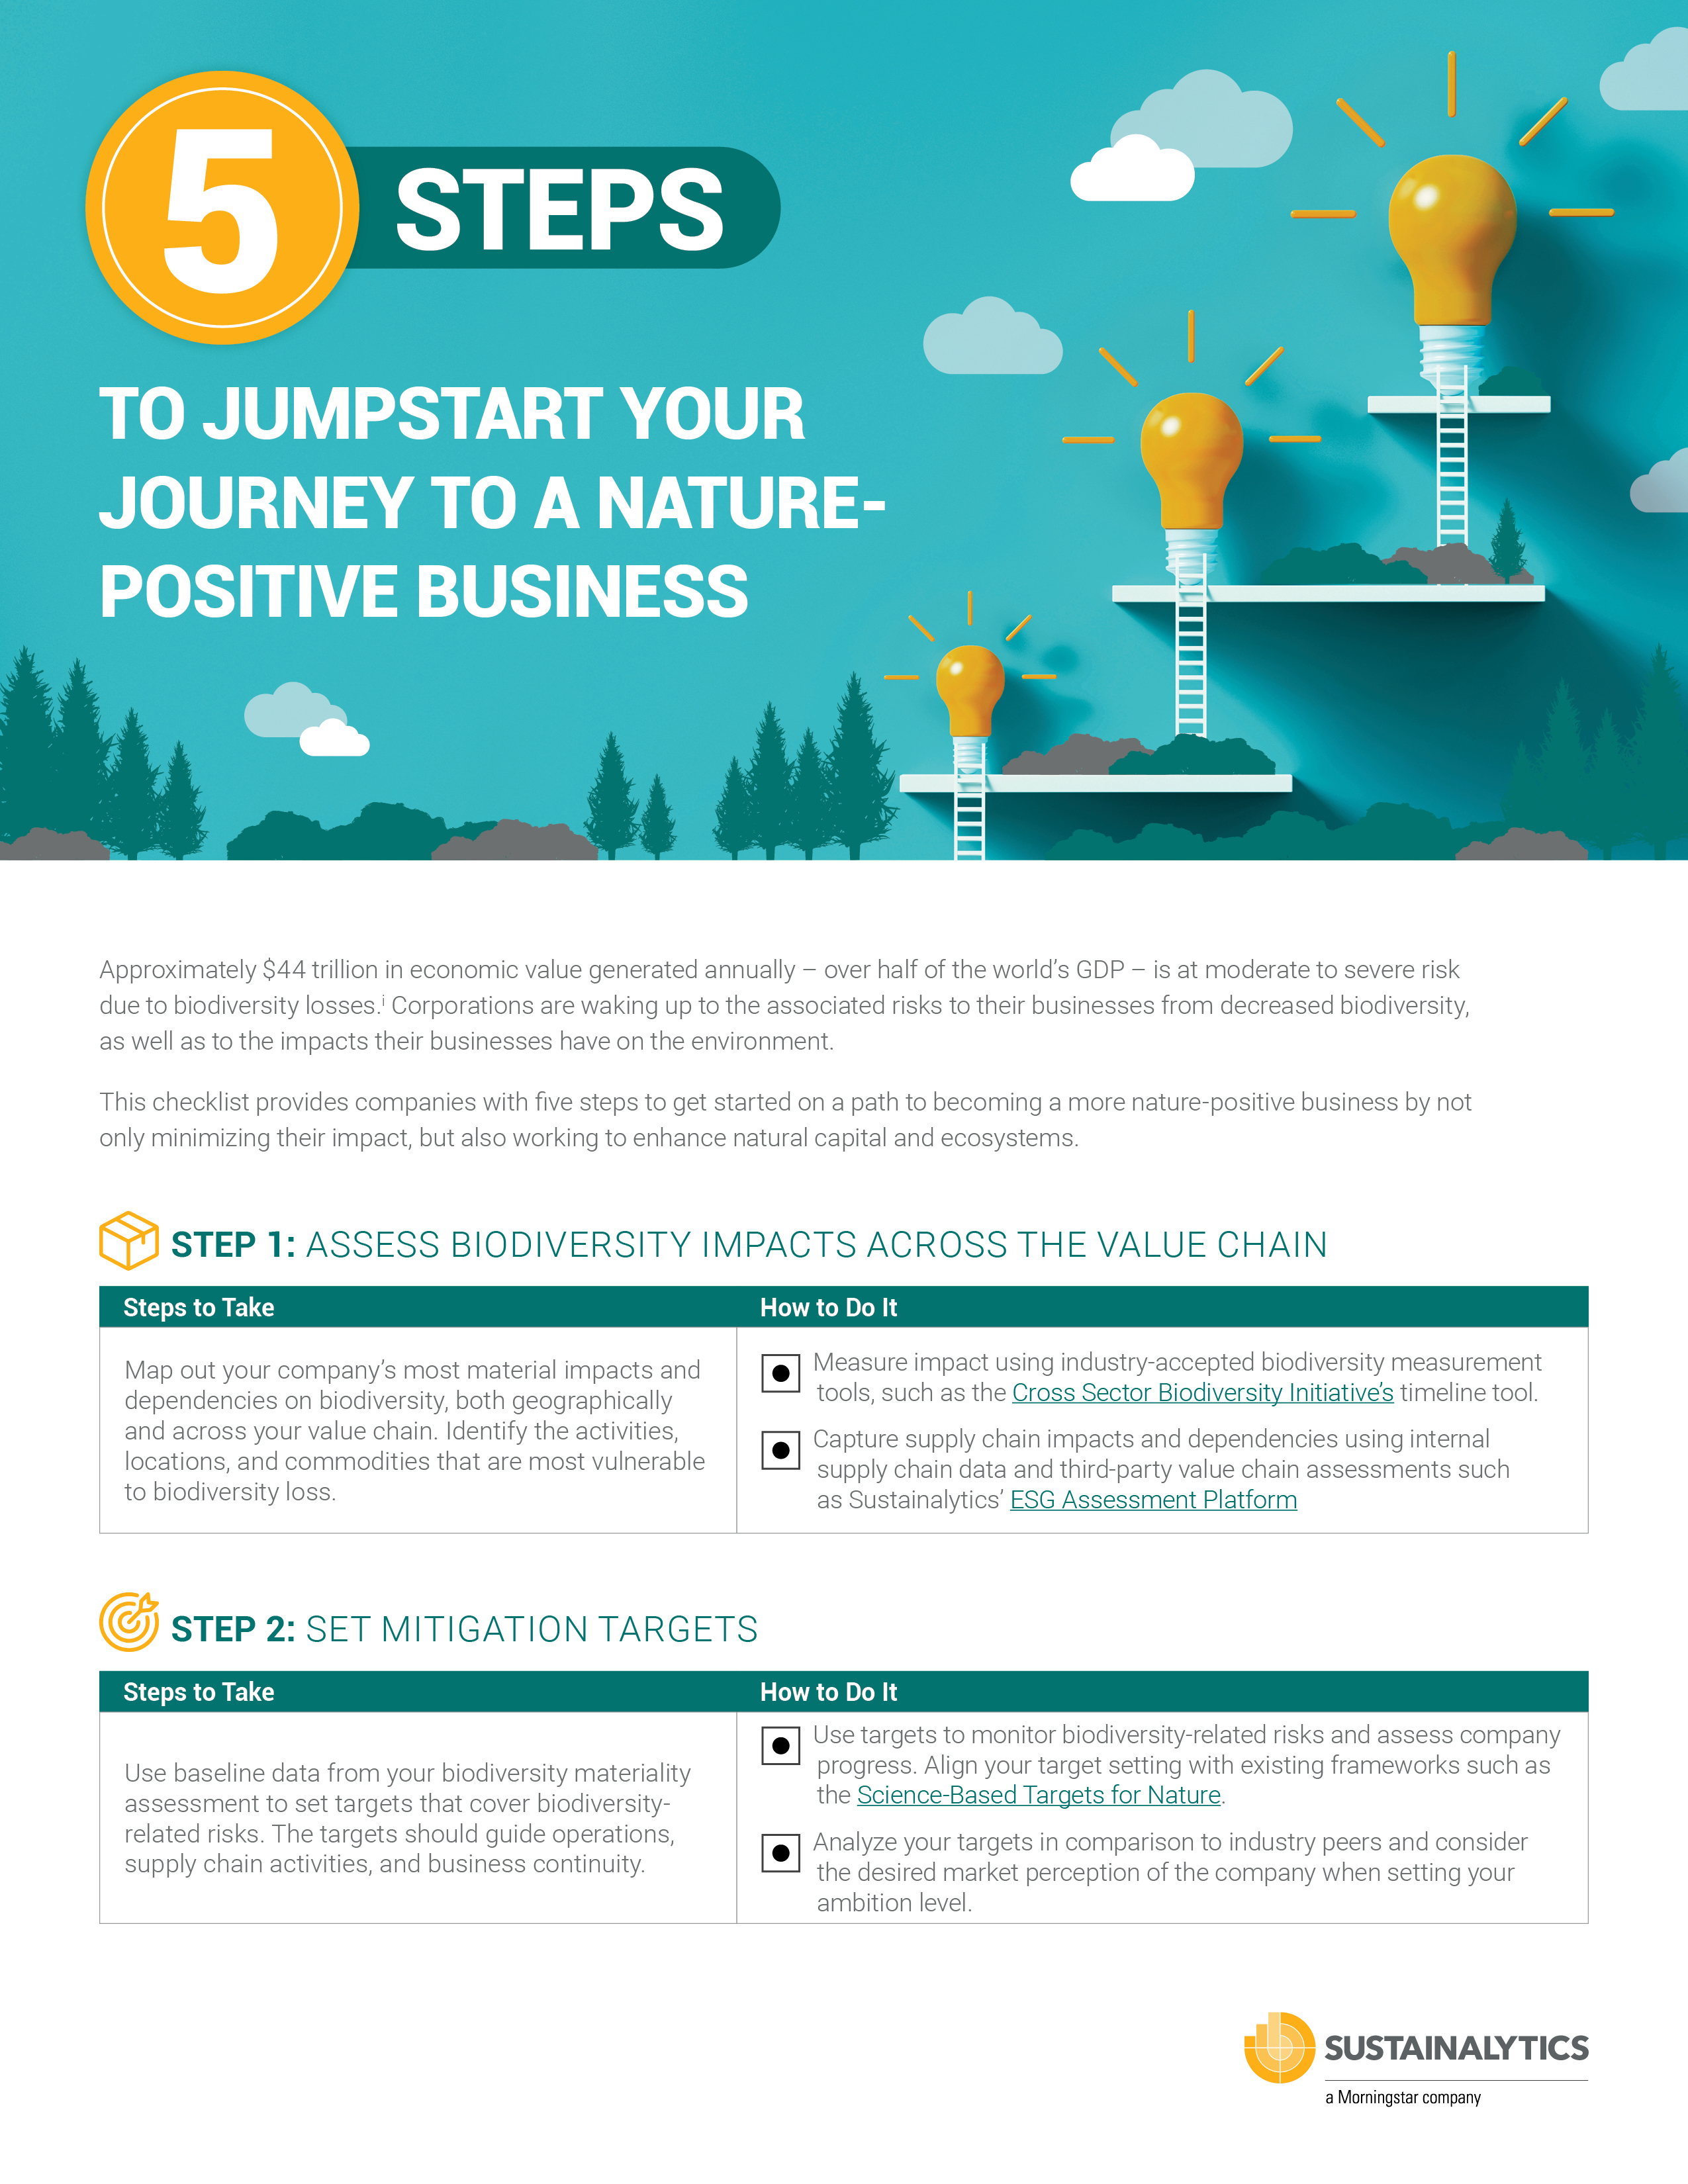 Screen shot of checkist - 5 Steps to Jumpstart Your to a Nature Positive Business